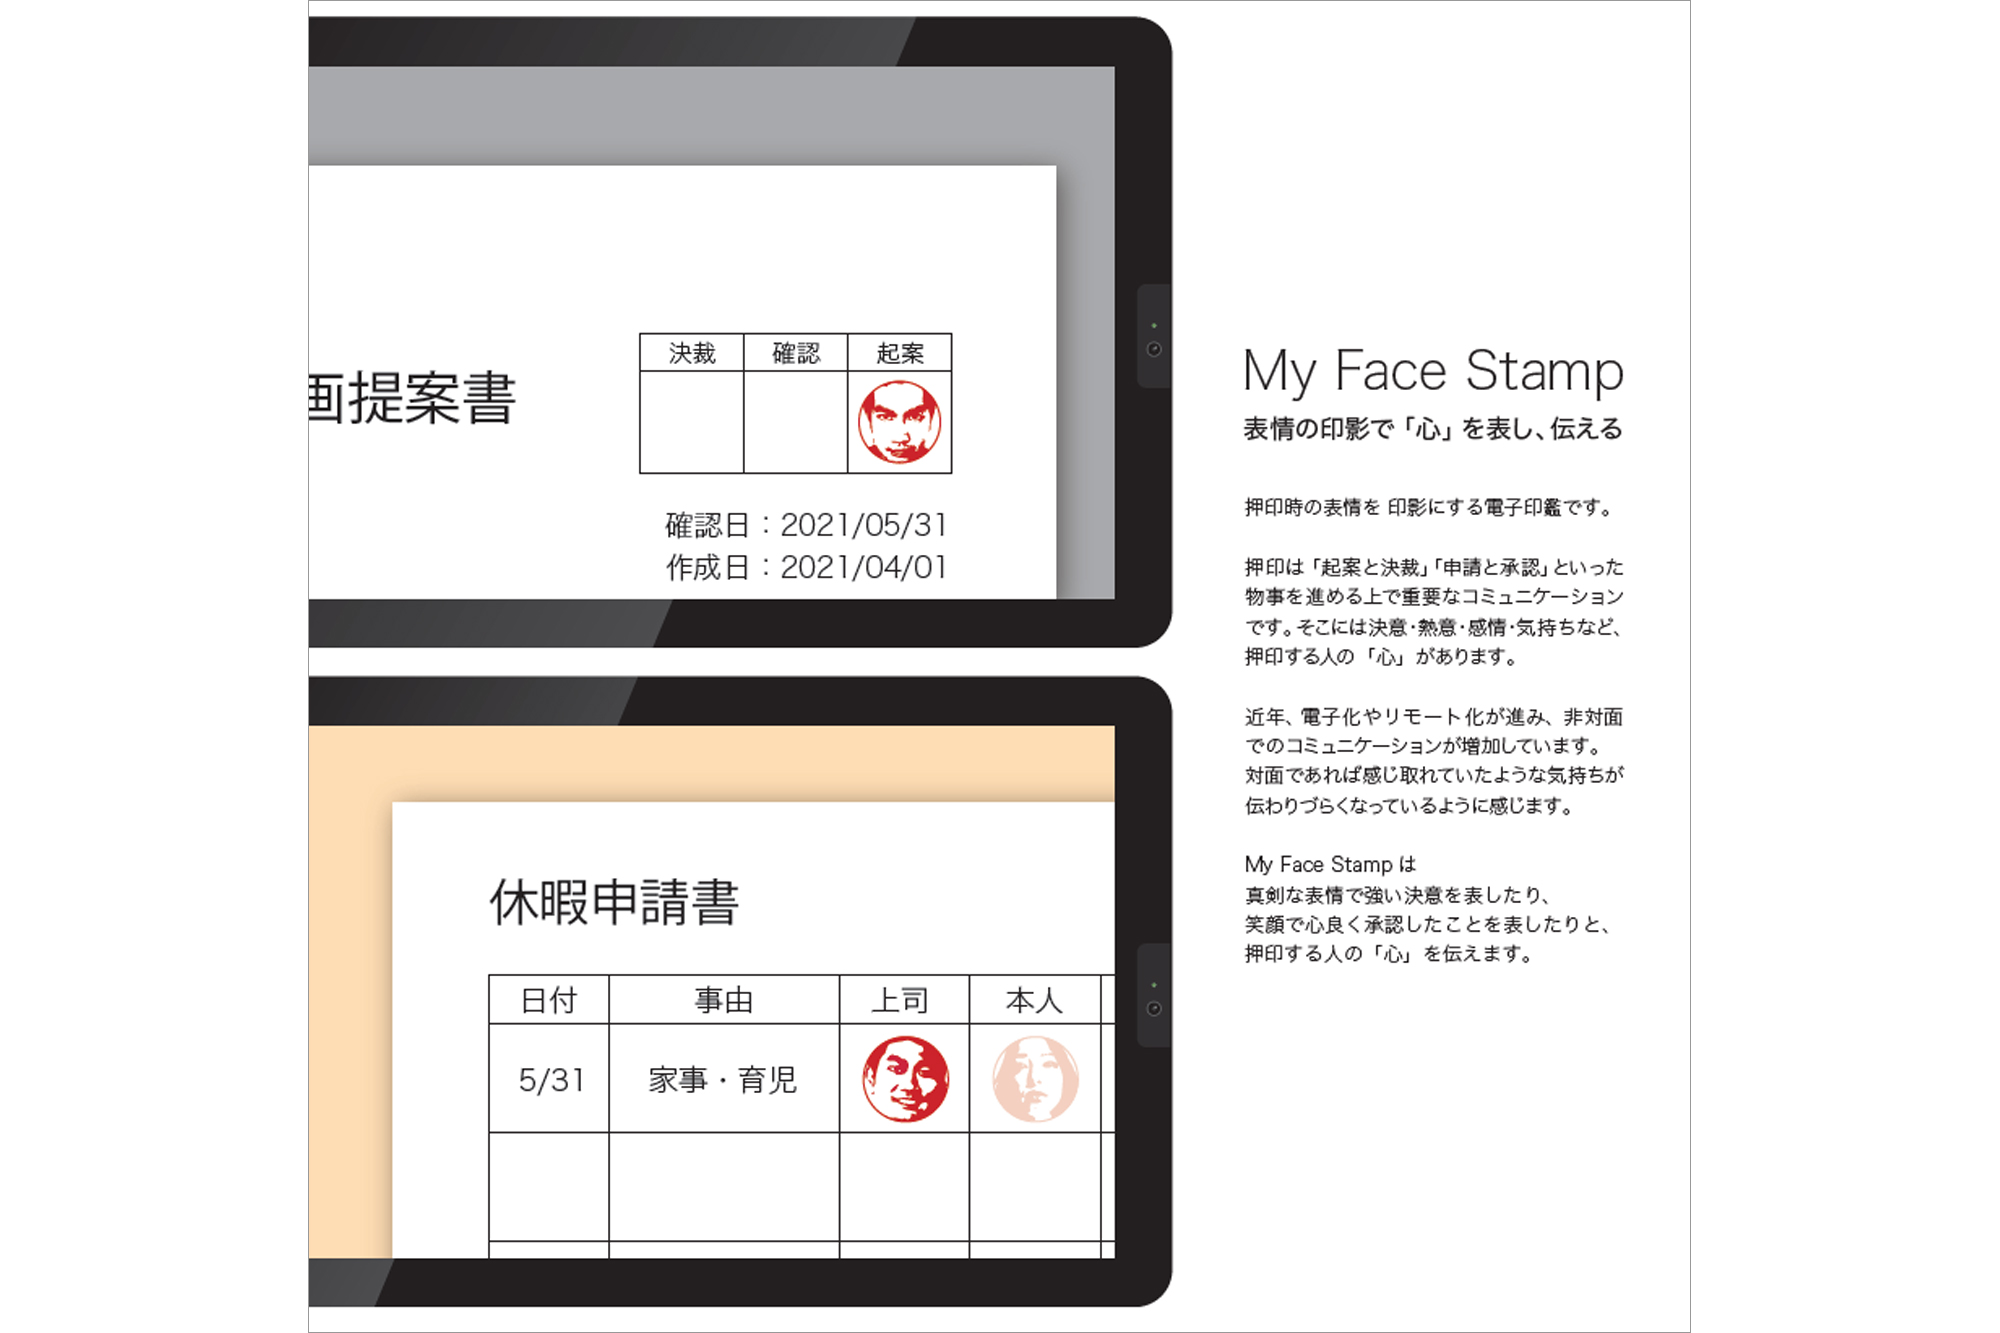 14th SHACHIHATA New Product Design Competition（第14回シヤチハタ・ニュープロダクト・デザインコンペティション）グランプリ「My Face Stamp」